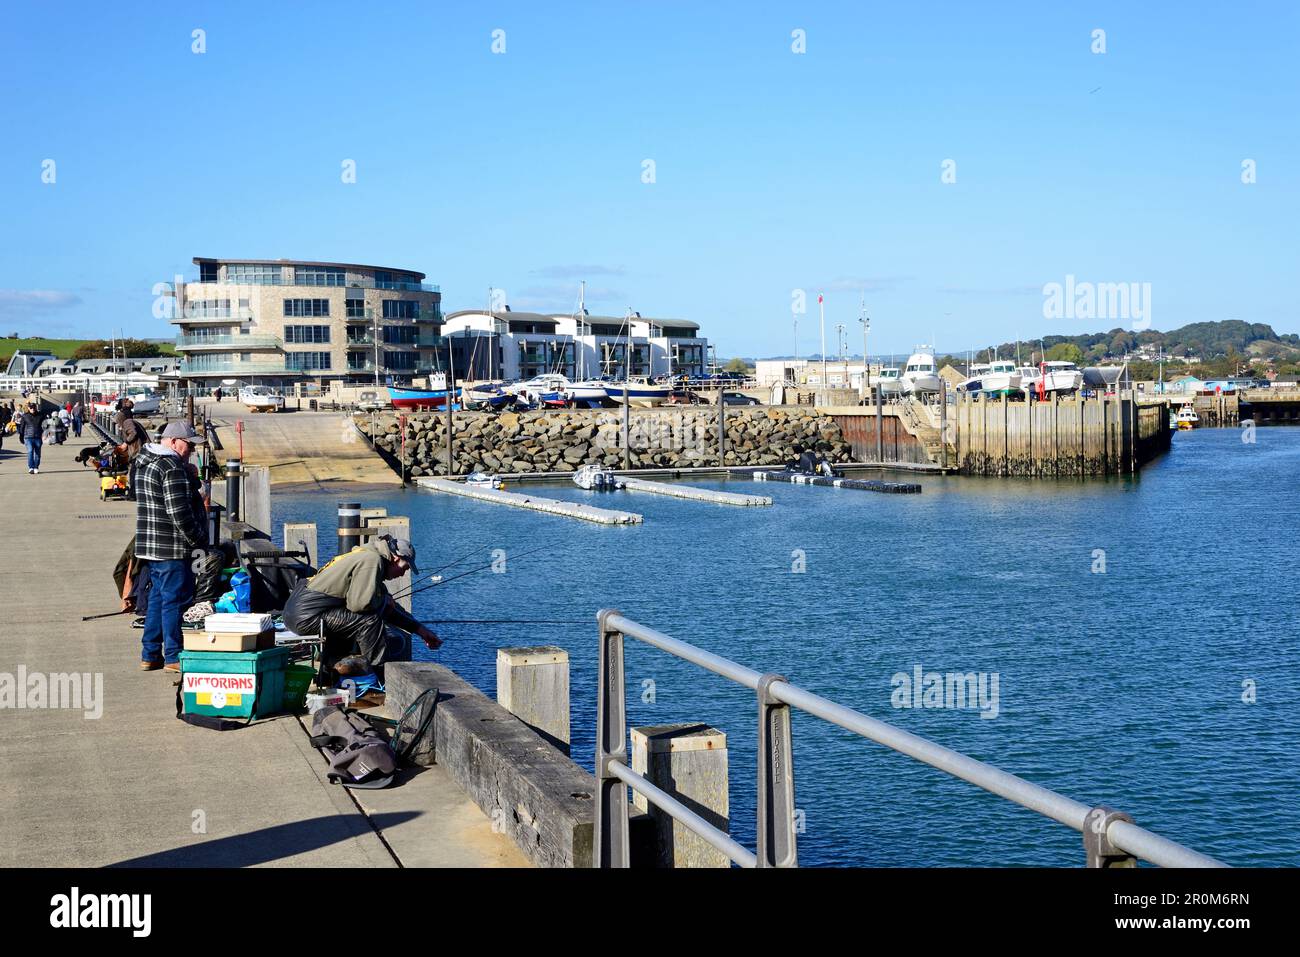 Men fishing from the harbour pier with town buildings to the rear, West Bay, Dorset, UK, Europe. Stock Photo